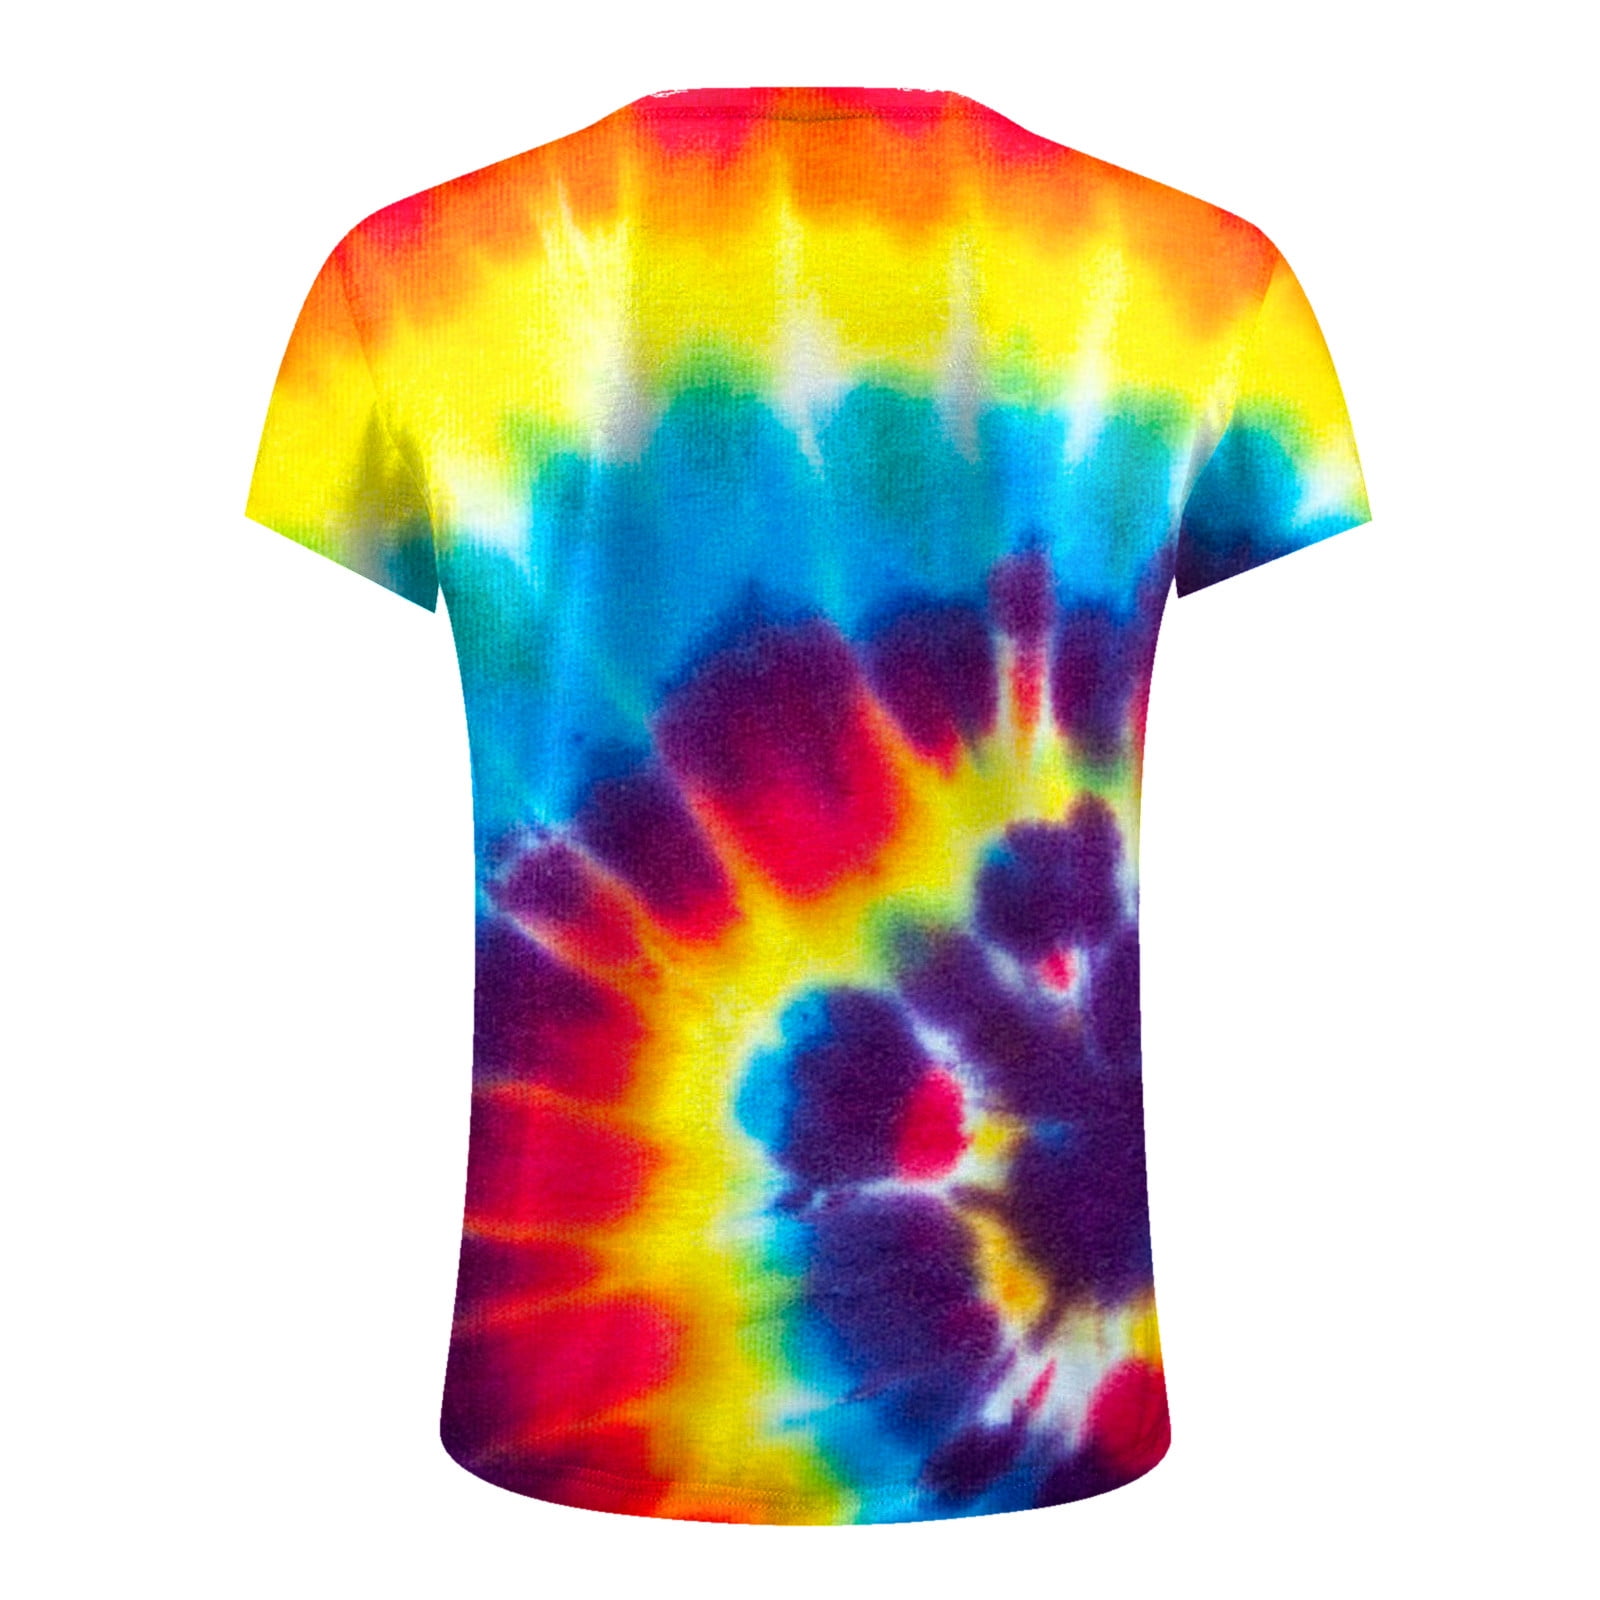 VSSSJ Tie Dye Shirts for Men Big and Tall Short Sleeve Rainbow Print Casual  Round Neck Tops Daily Athletic Stretch Reversible Shirts Multicolor XXXXXXL  